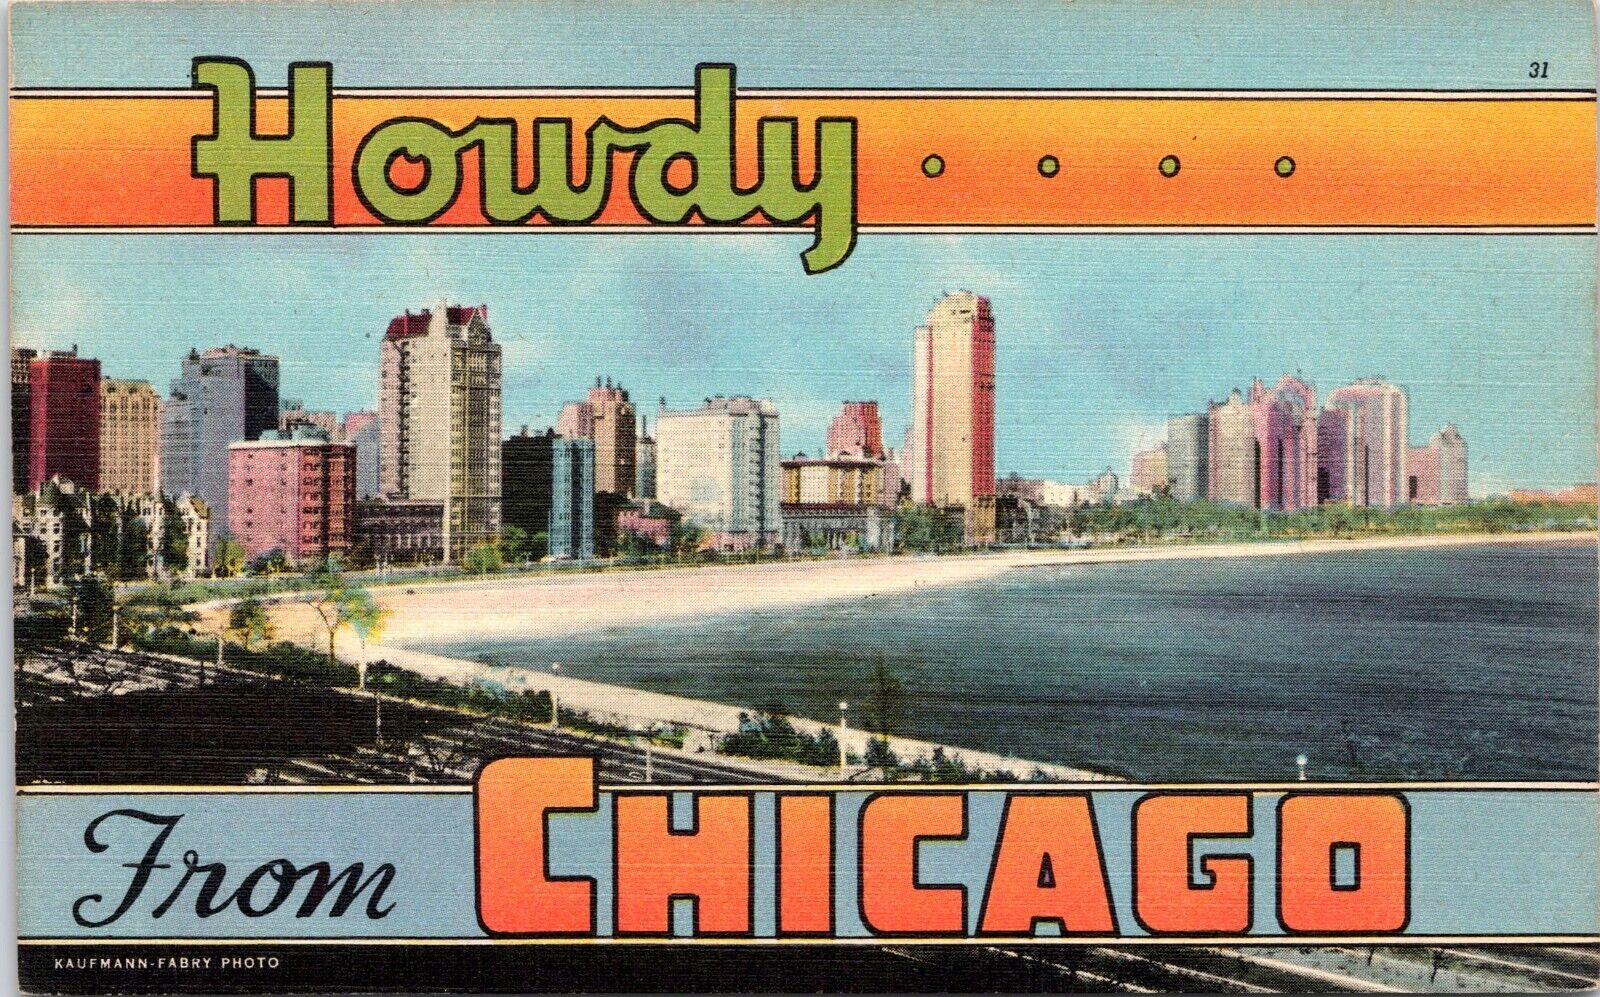 Howdy from Chicago Illinois - Vintage Linen Postcard - Gold Coast